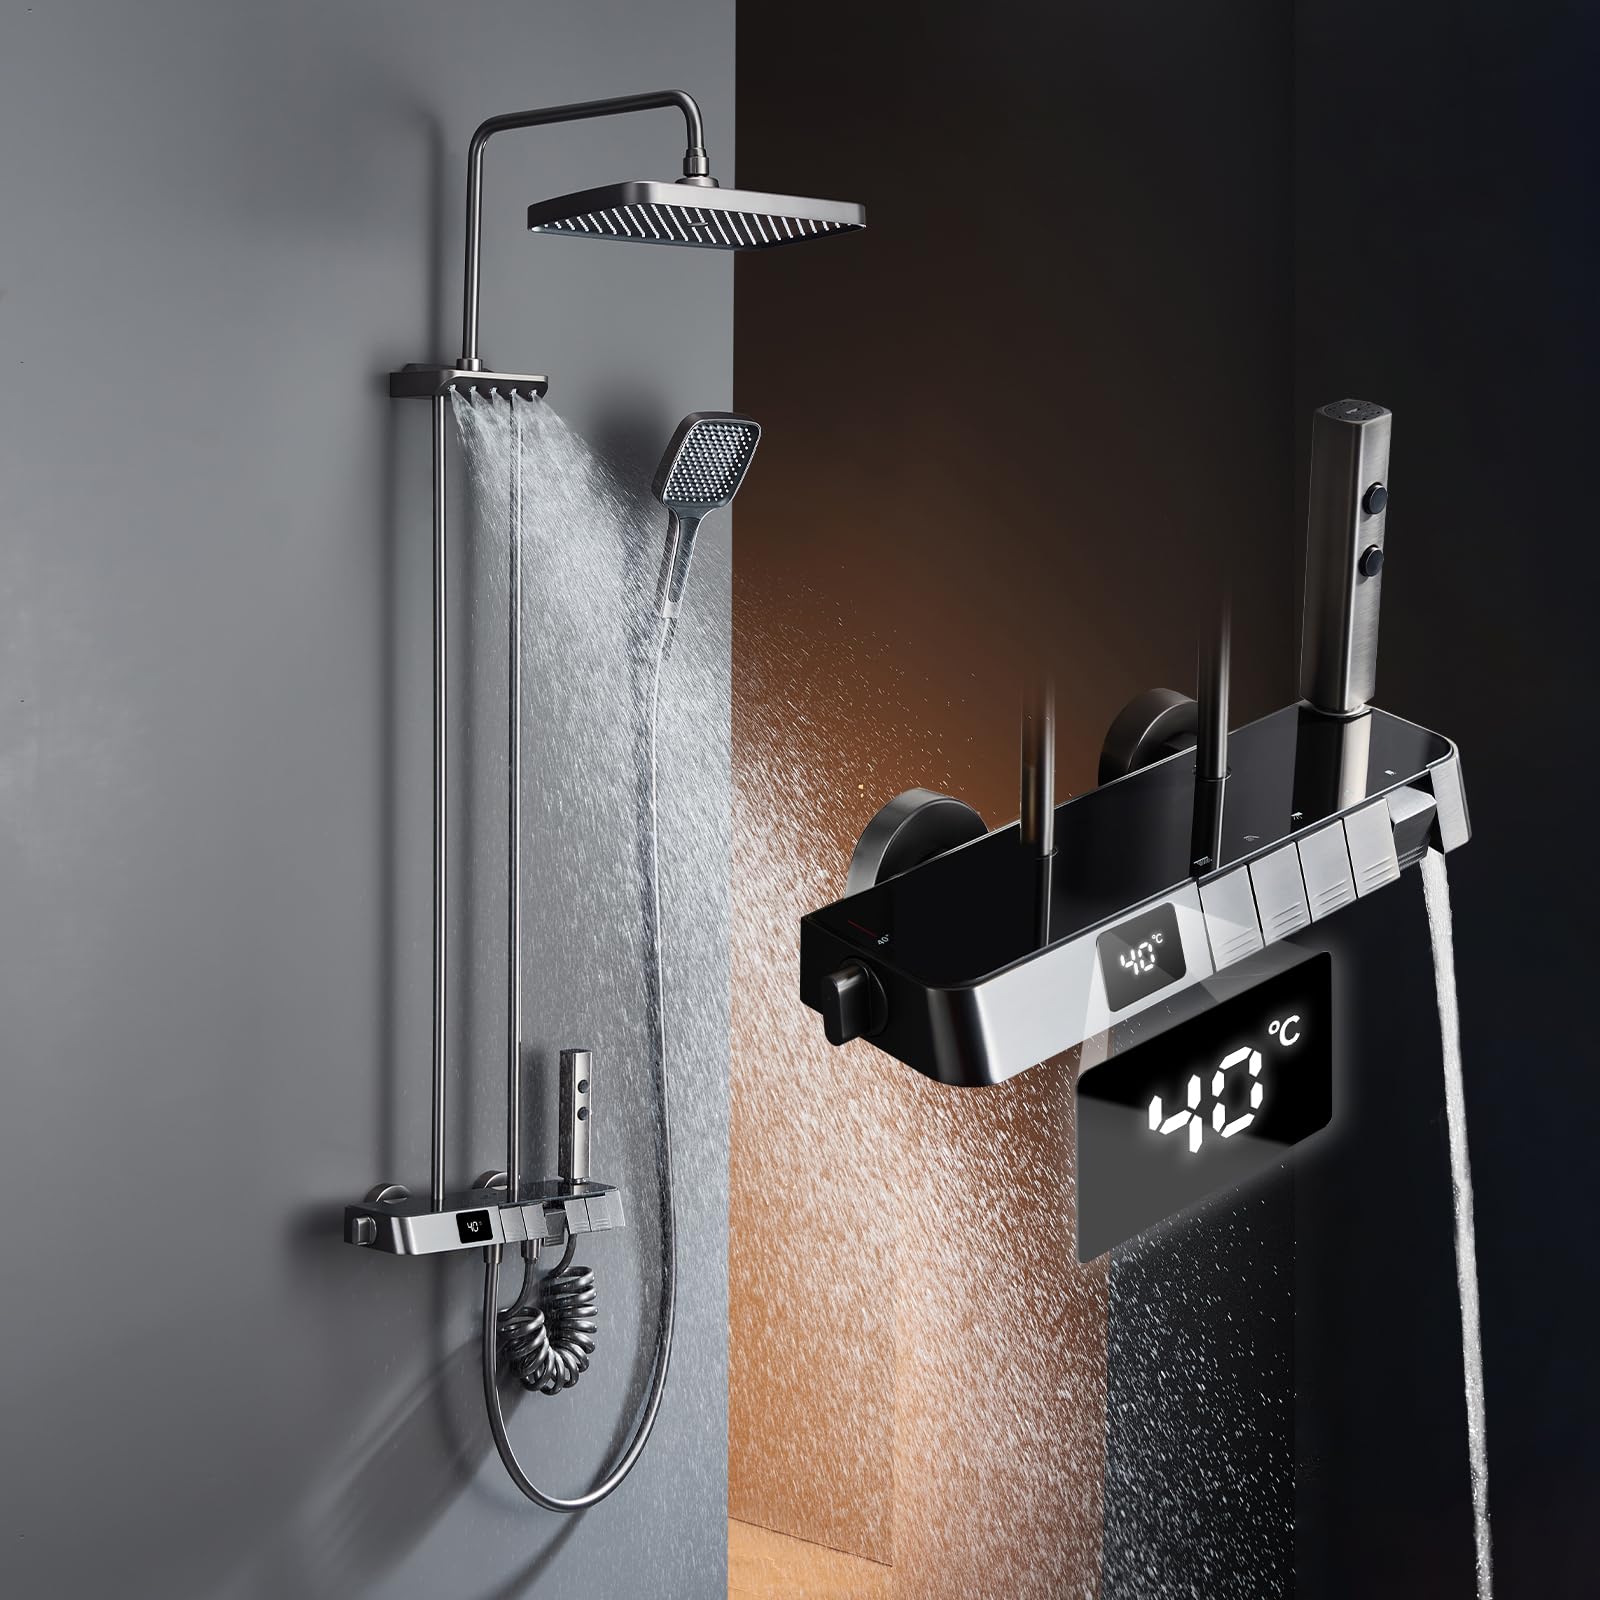 How to install shower faucets?